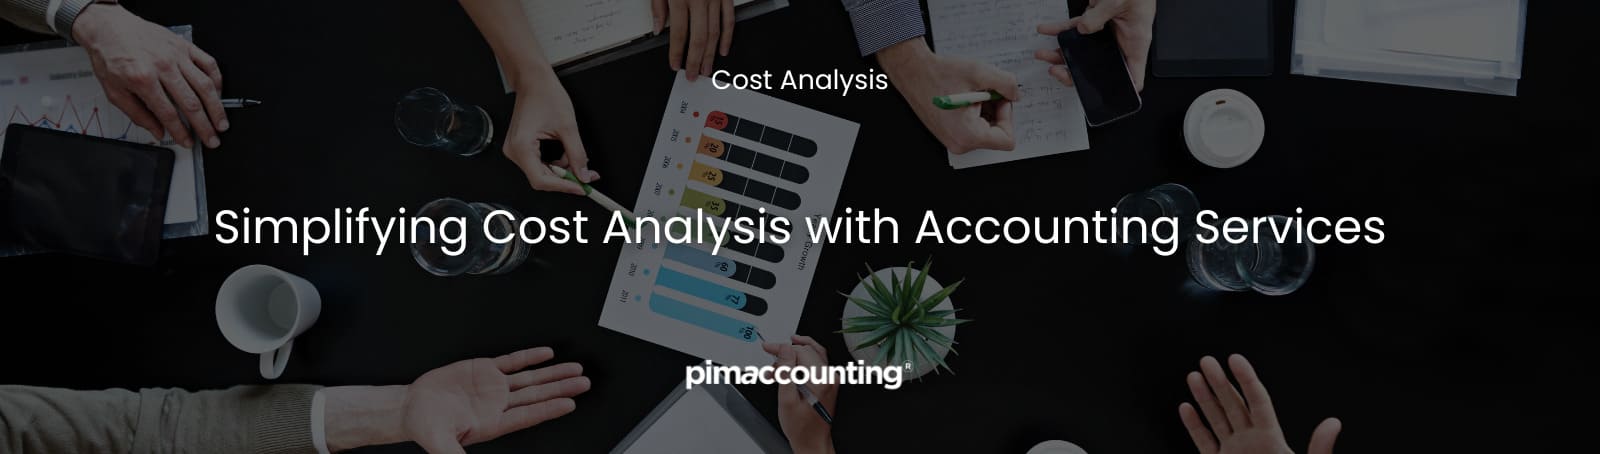 Simplifying Cost Analysis with Accounting Services